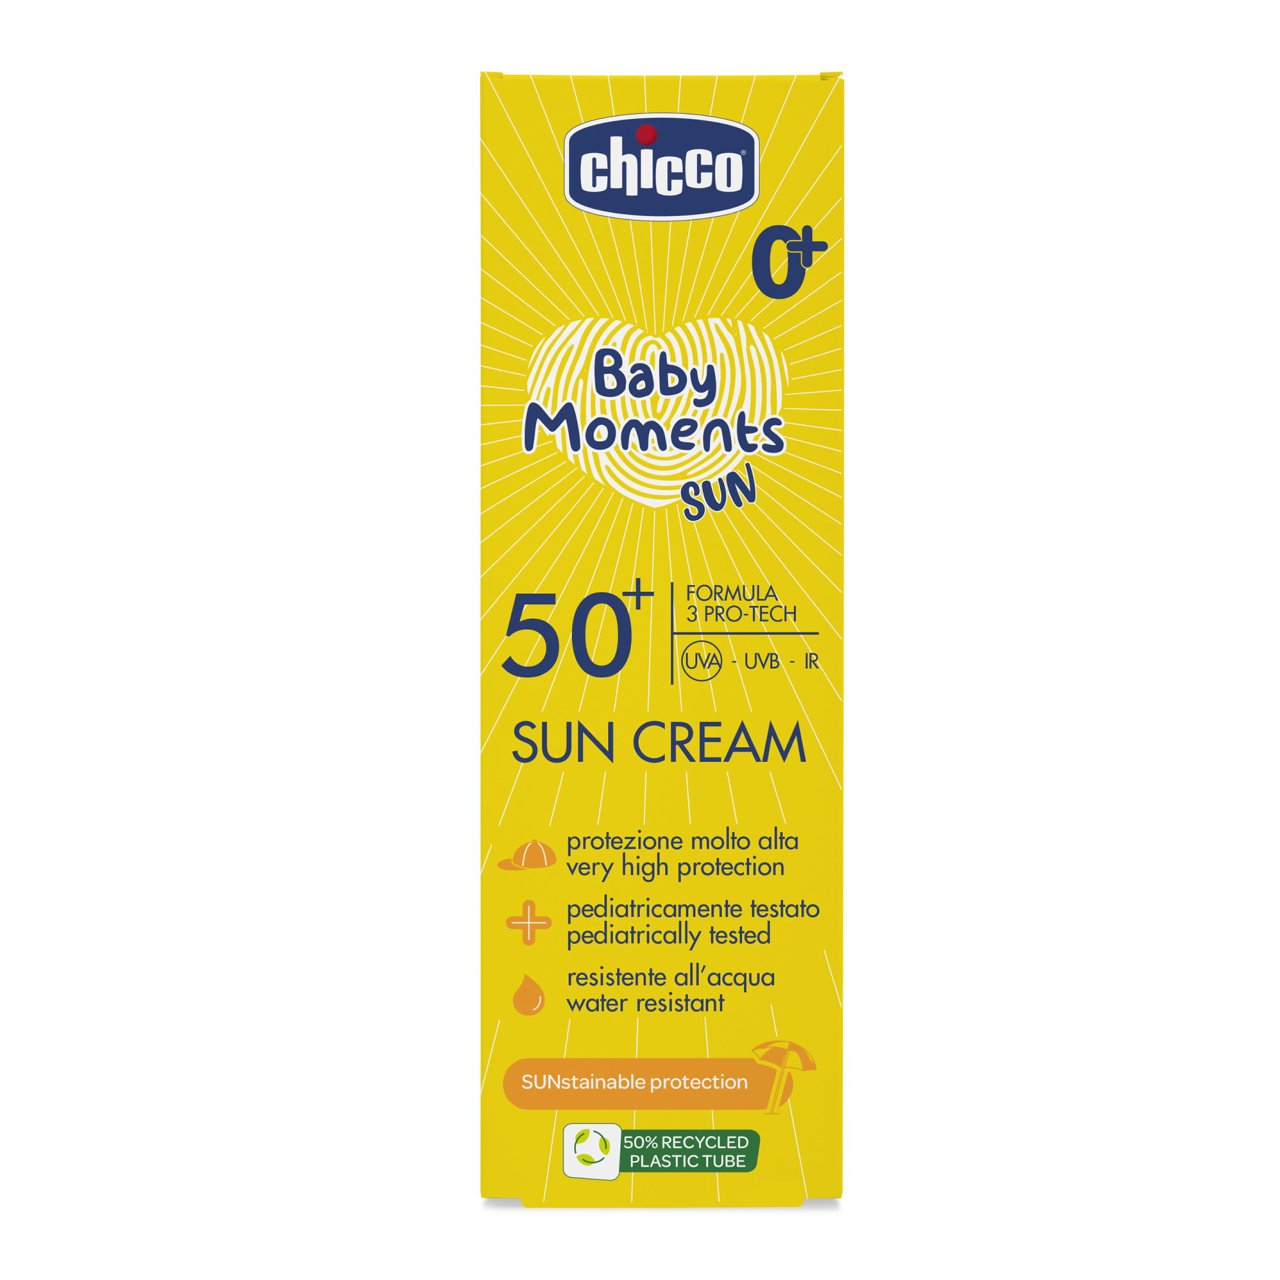 Baby Moments SUN - Crema solare SPF 50+ 75 ml. image number 8